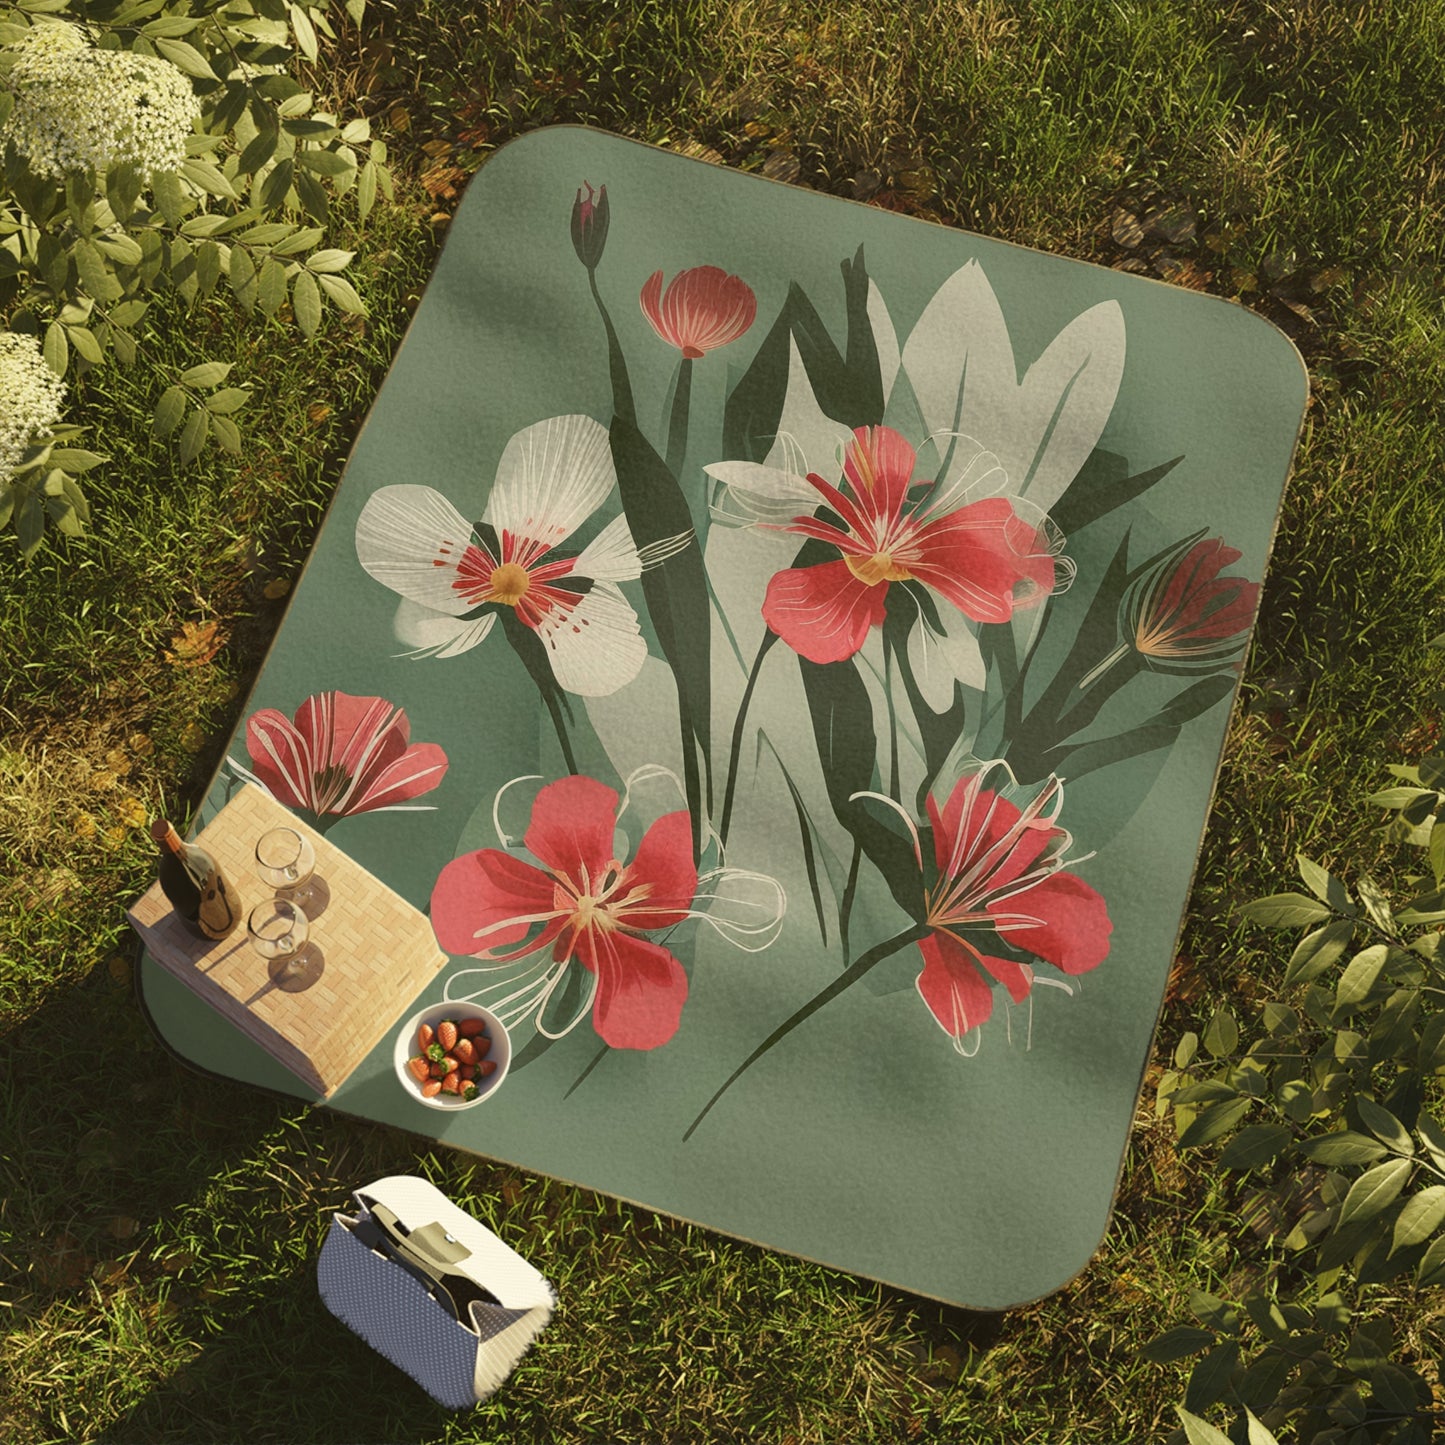 Outdoor Picnic Blanket with Soft Fleece Top and Water-Resistant Bottom - White and Red Wildflowers